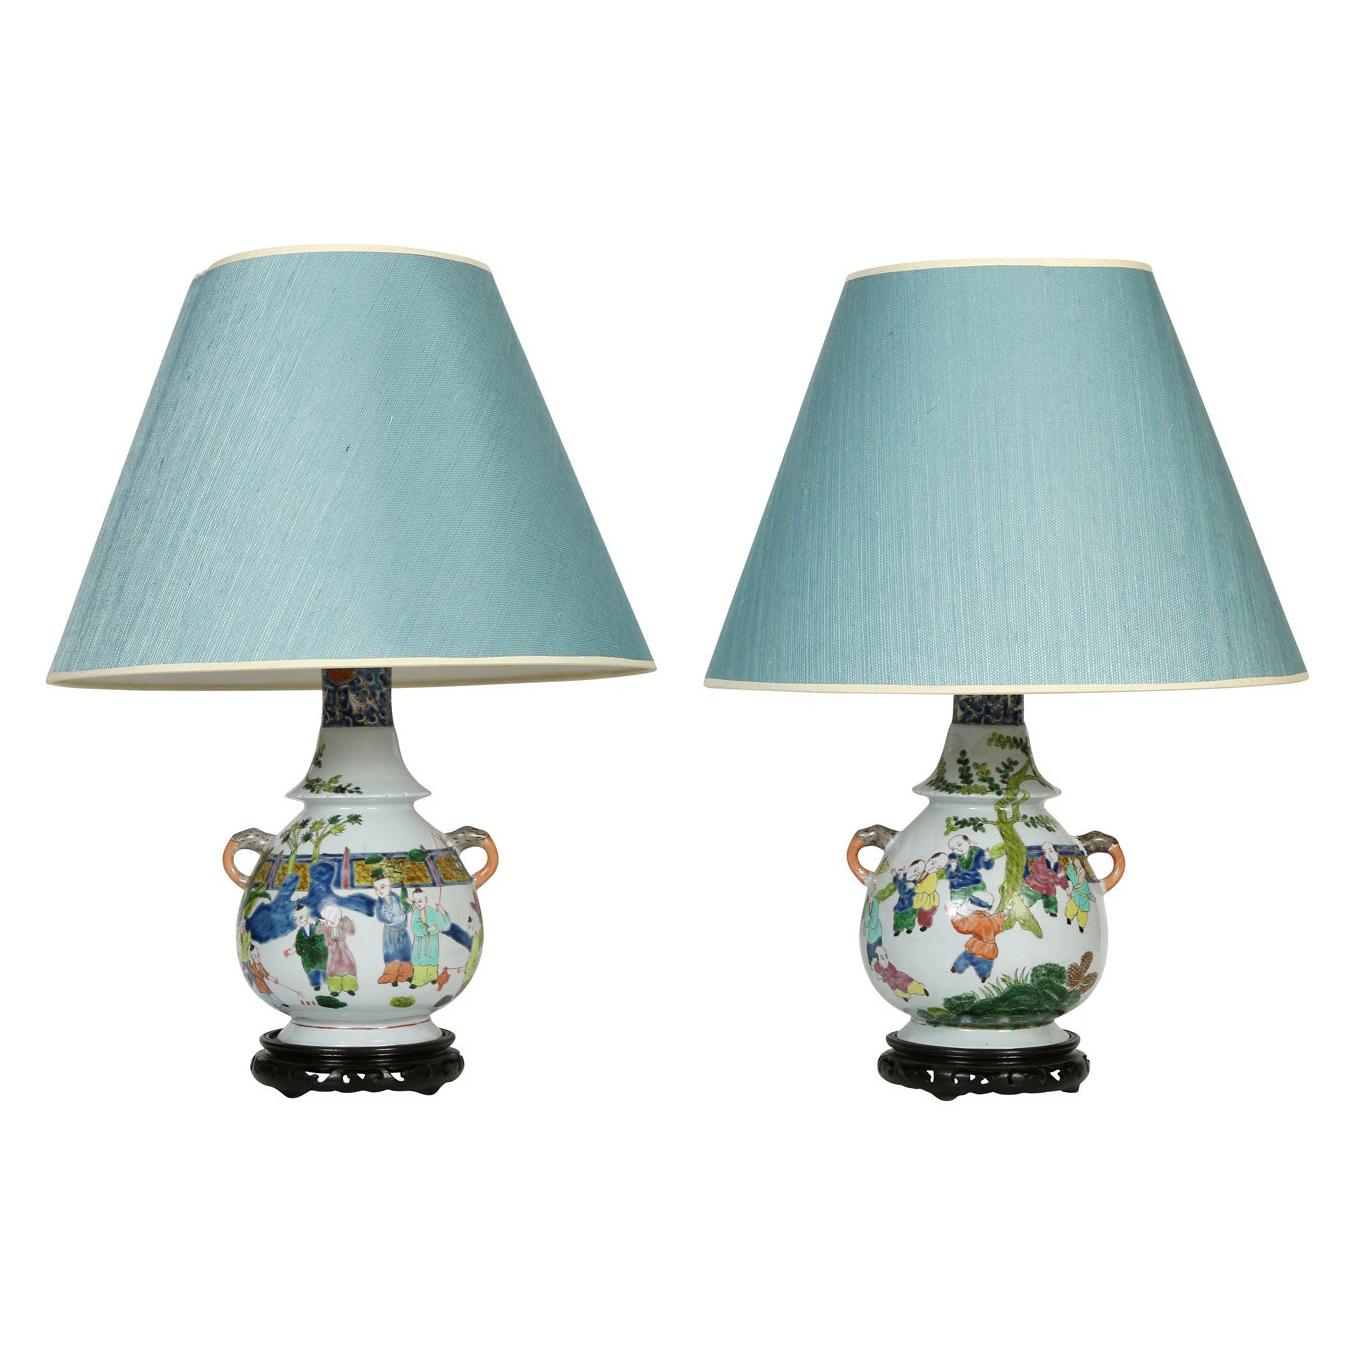 Pair of Chinese Porcelain Polychrome Lamps